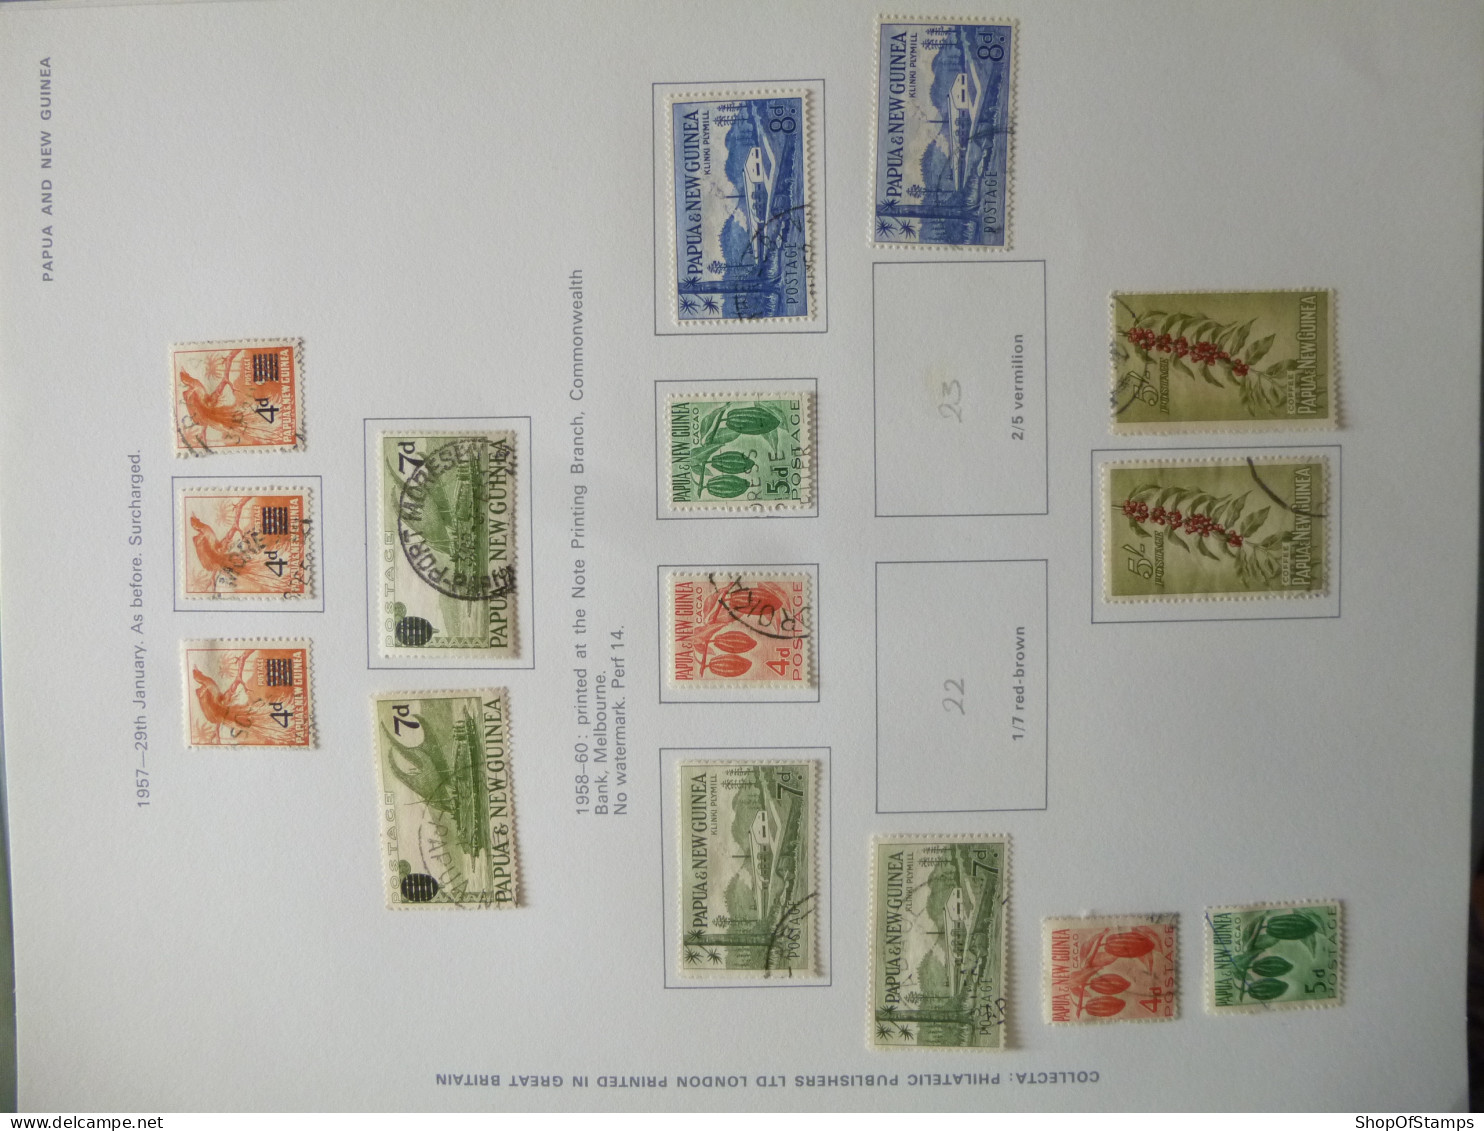 PAPUA NEW GUINEA SG 1/396 TOTAL 317 STAMPS [223 DIFFERENT 94 DUPLICATE] - Papua New Guinea